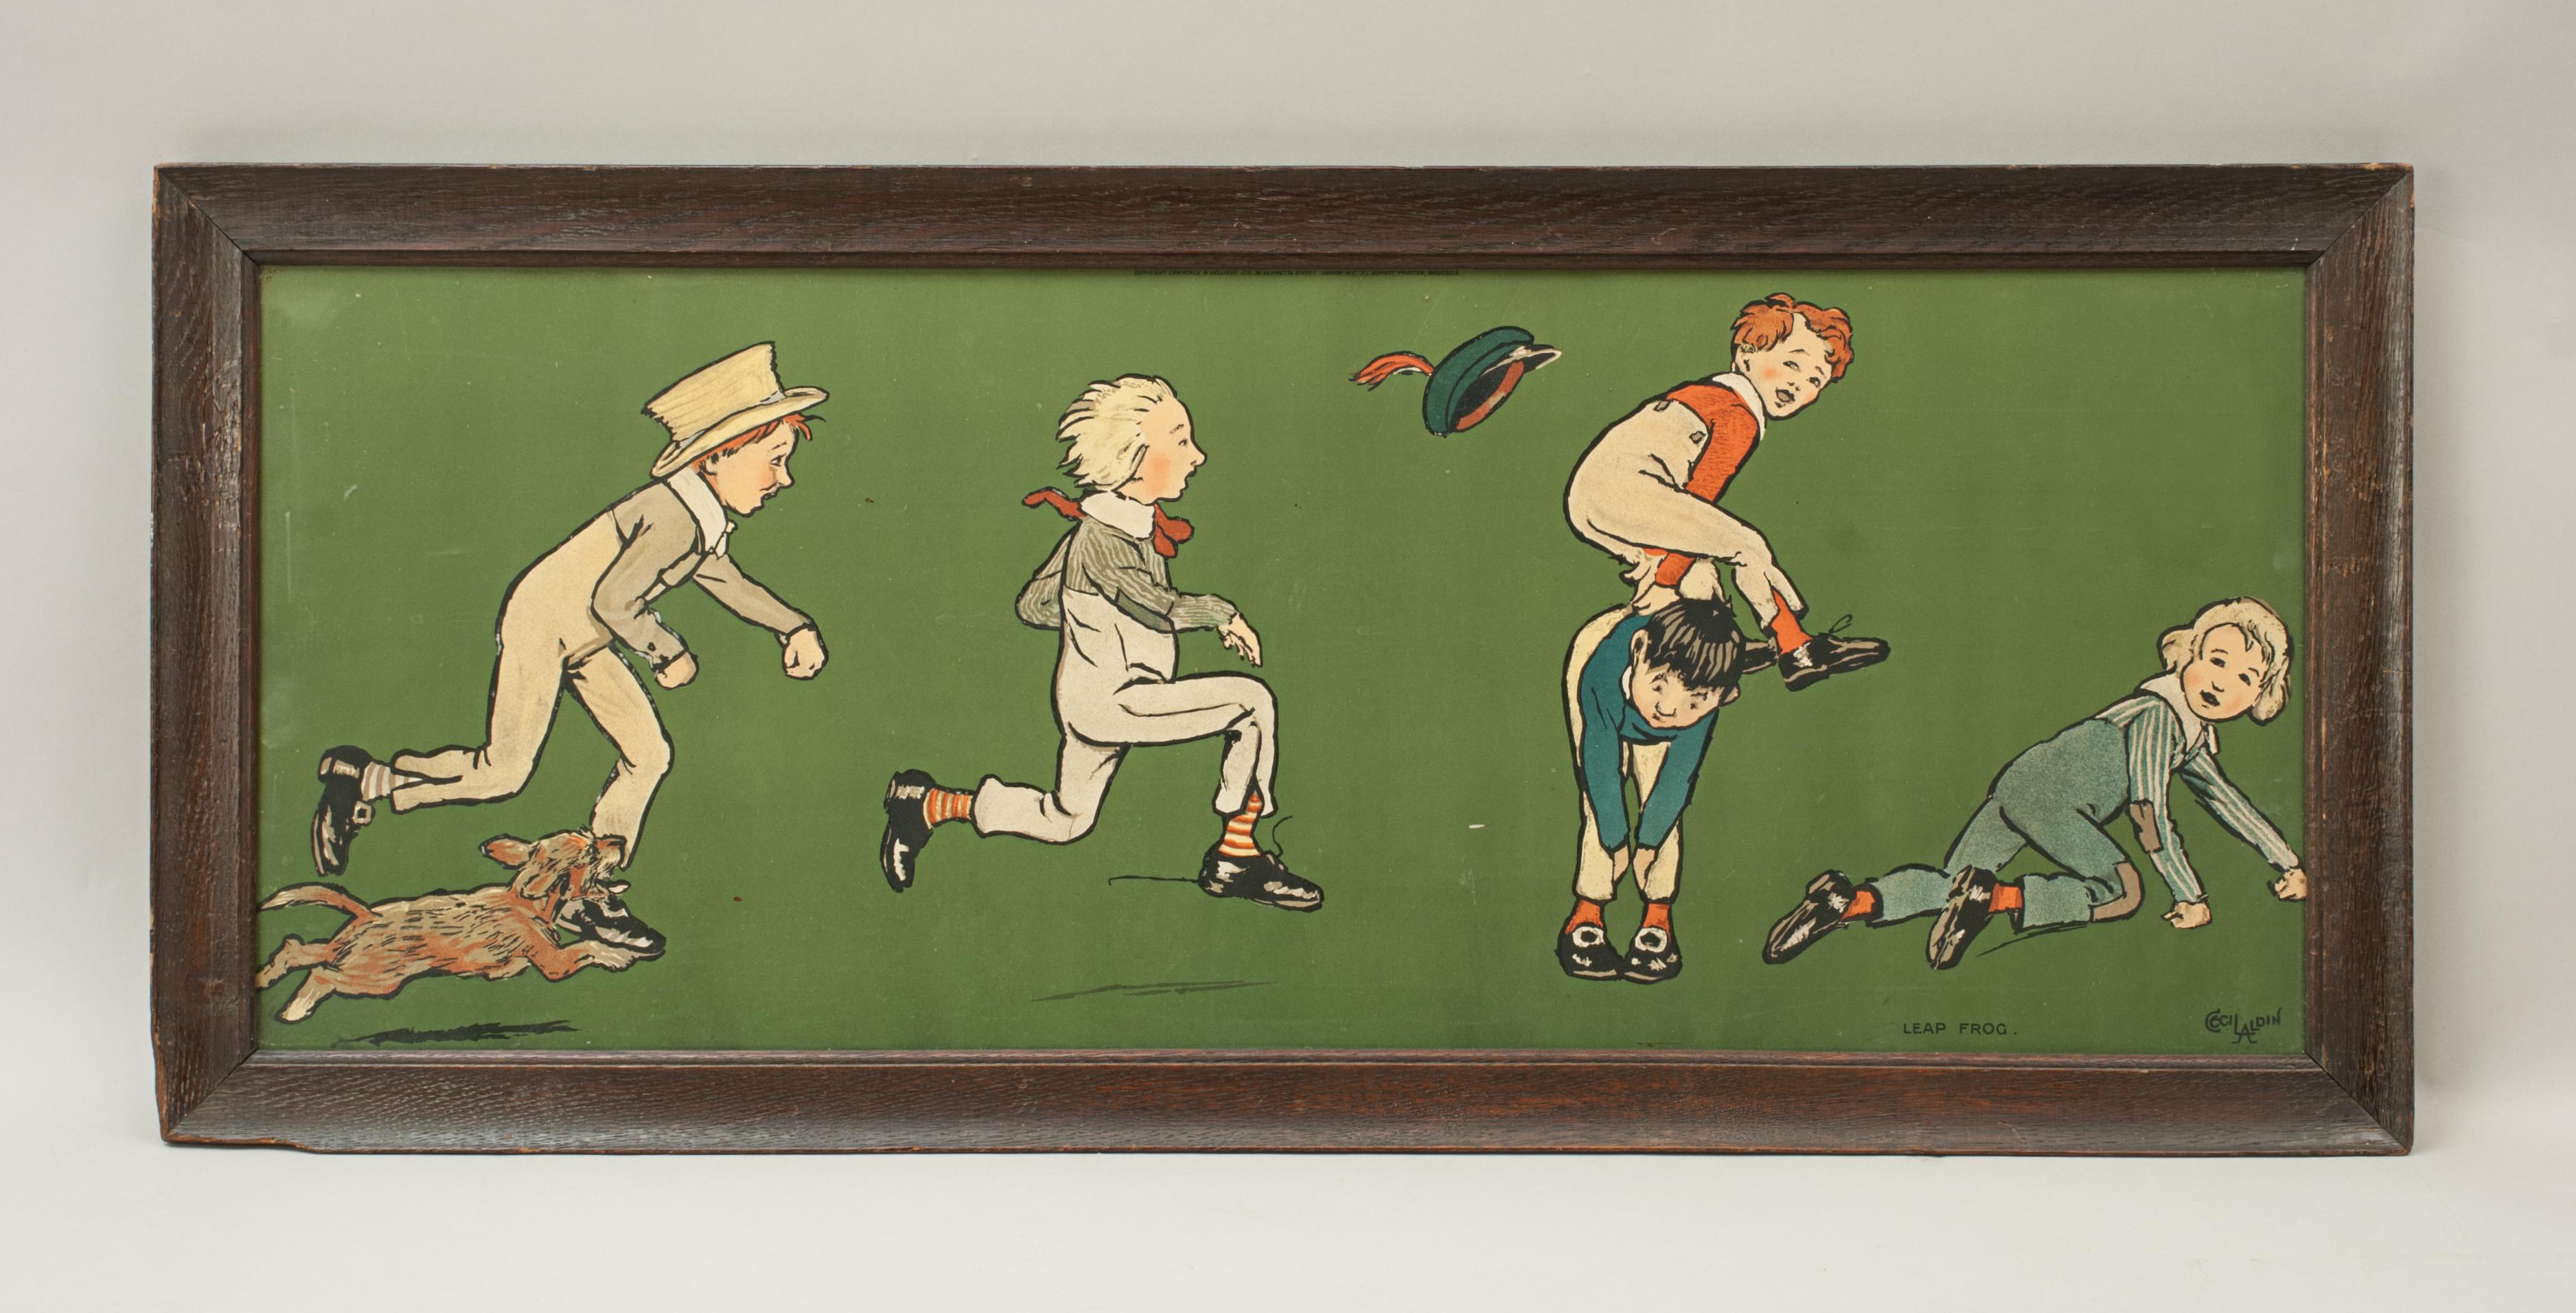 Cecil Aldin, leap frog.
A good single chromolithograph from a set of 12 Nursery friezes developed from designs which Aldin had painted on the walls of his children's nursery. This is called 'Leap Frog' and shows five young children playing leap